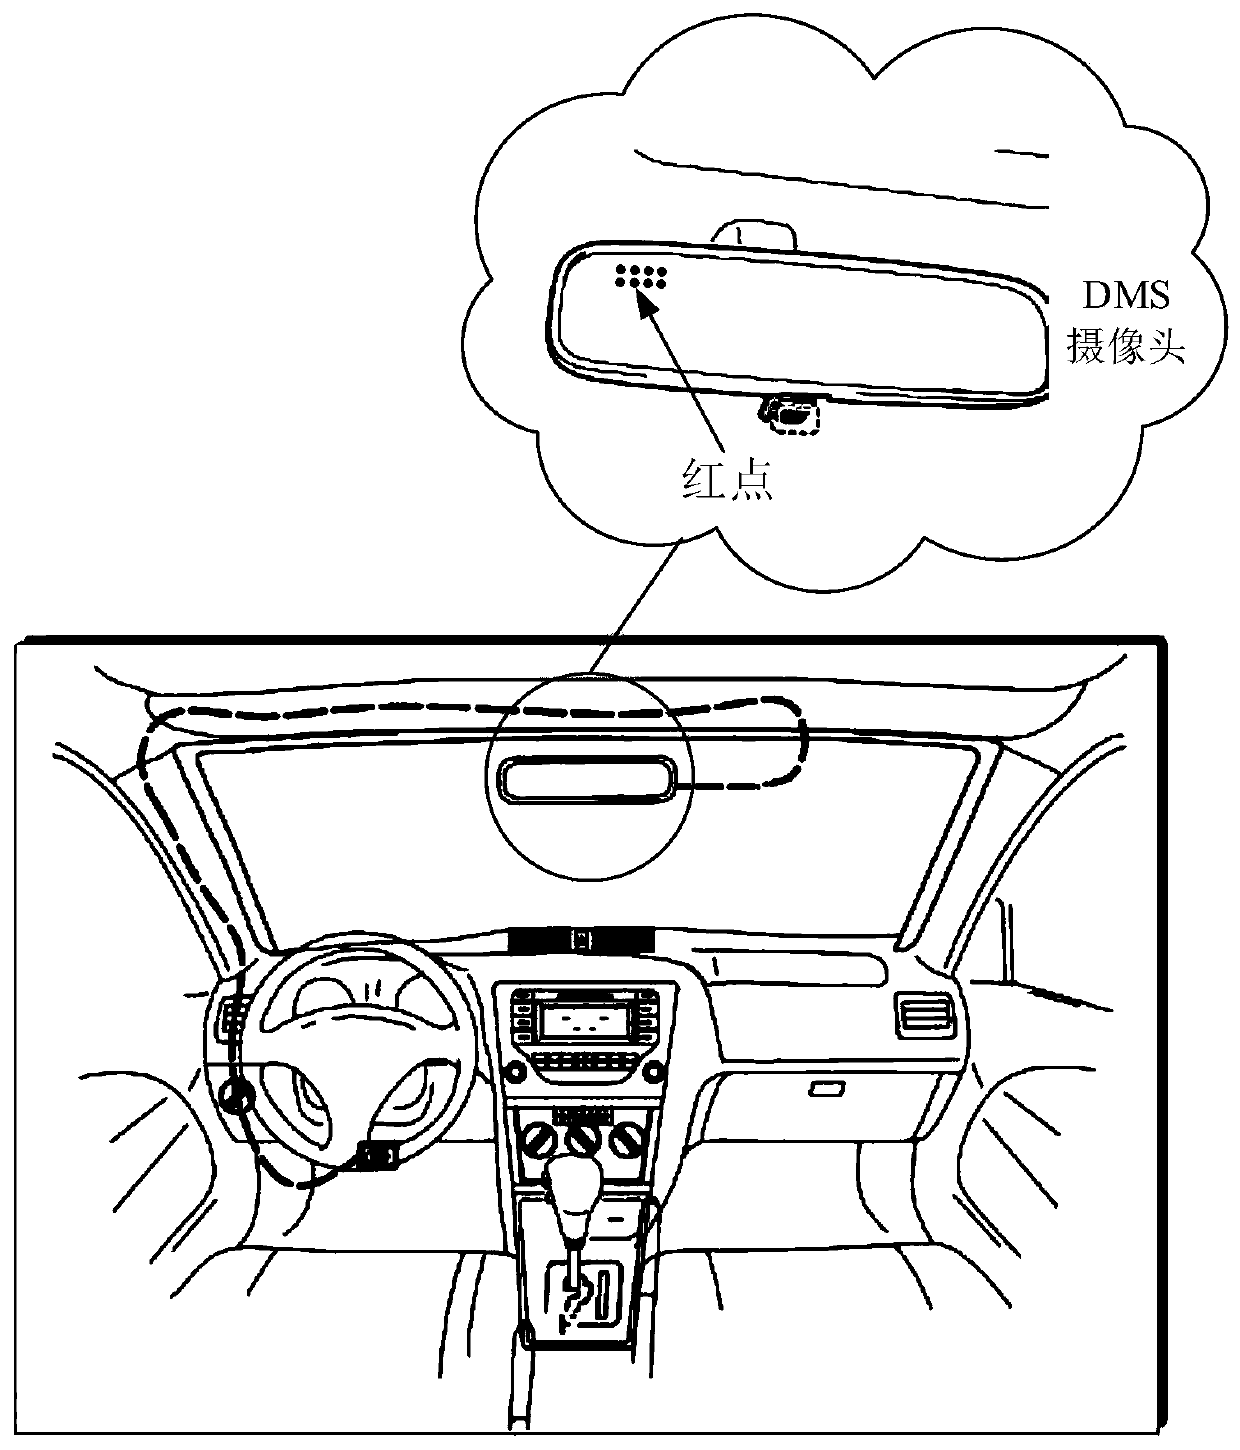 Light supplement control circuit, DMS camera, fatigue driving monitoring system and automobile